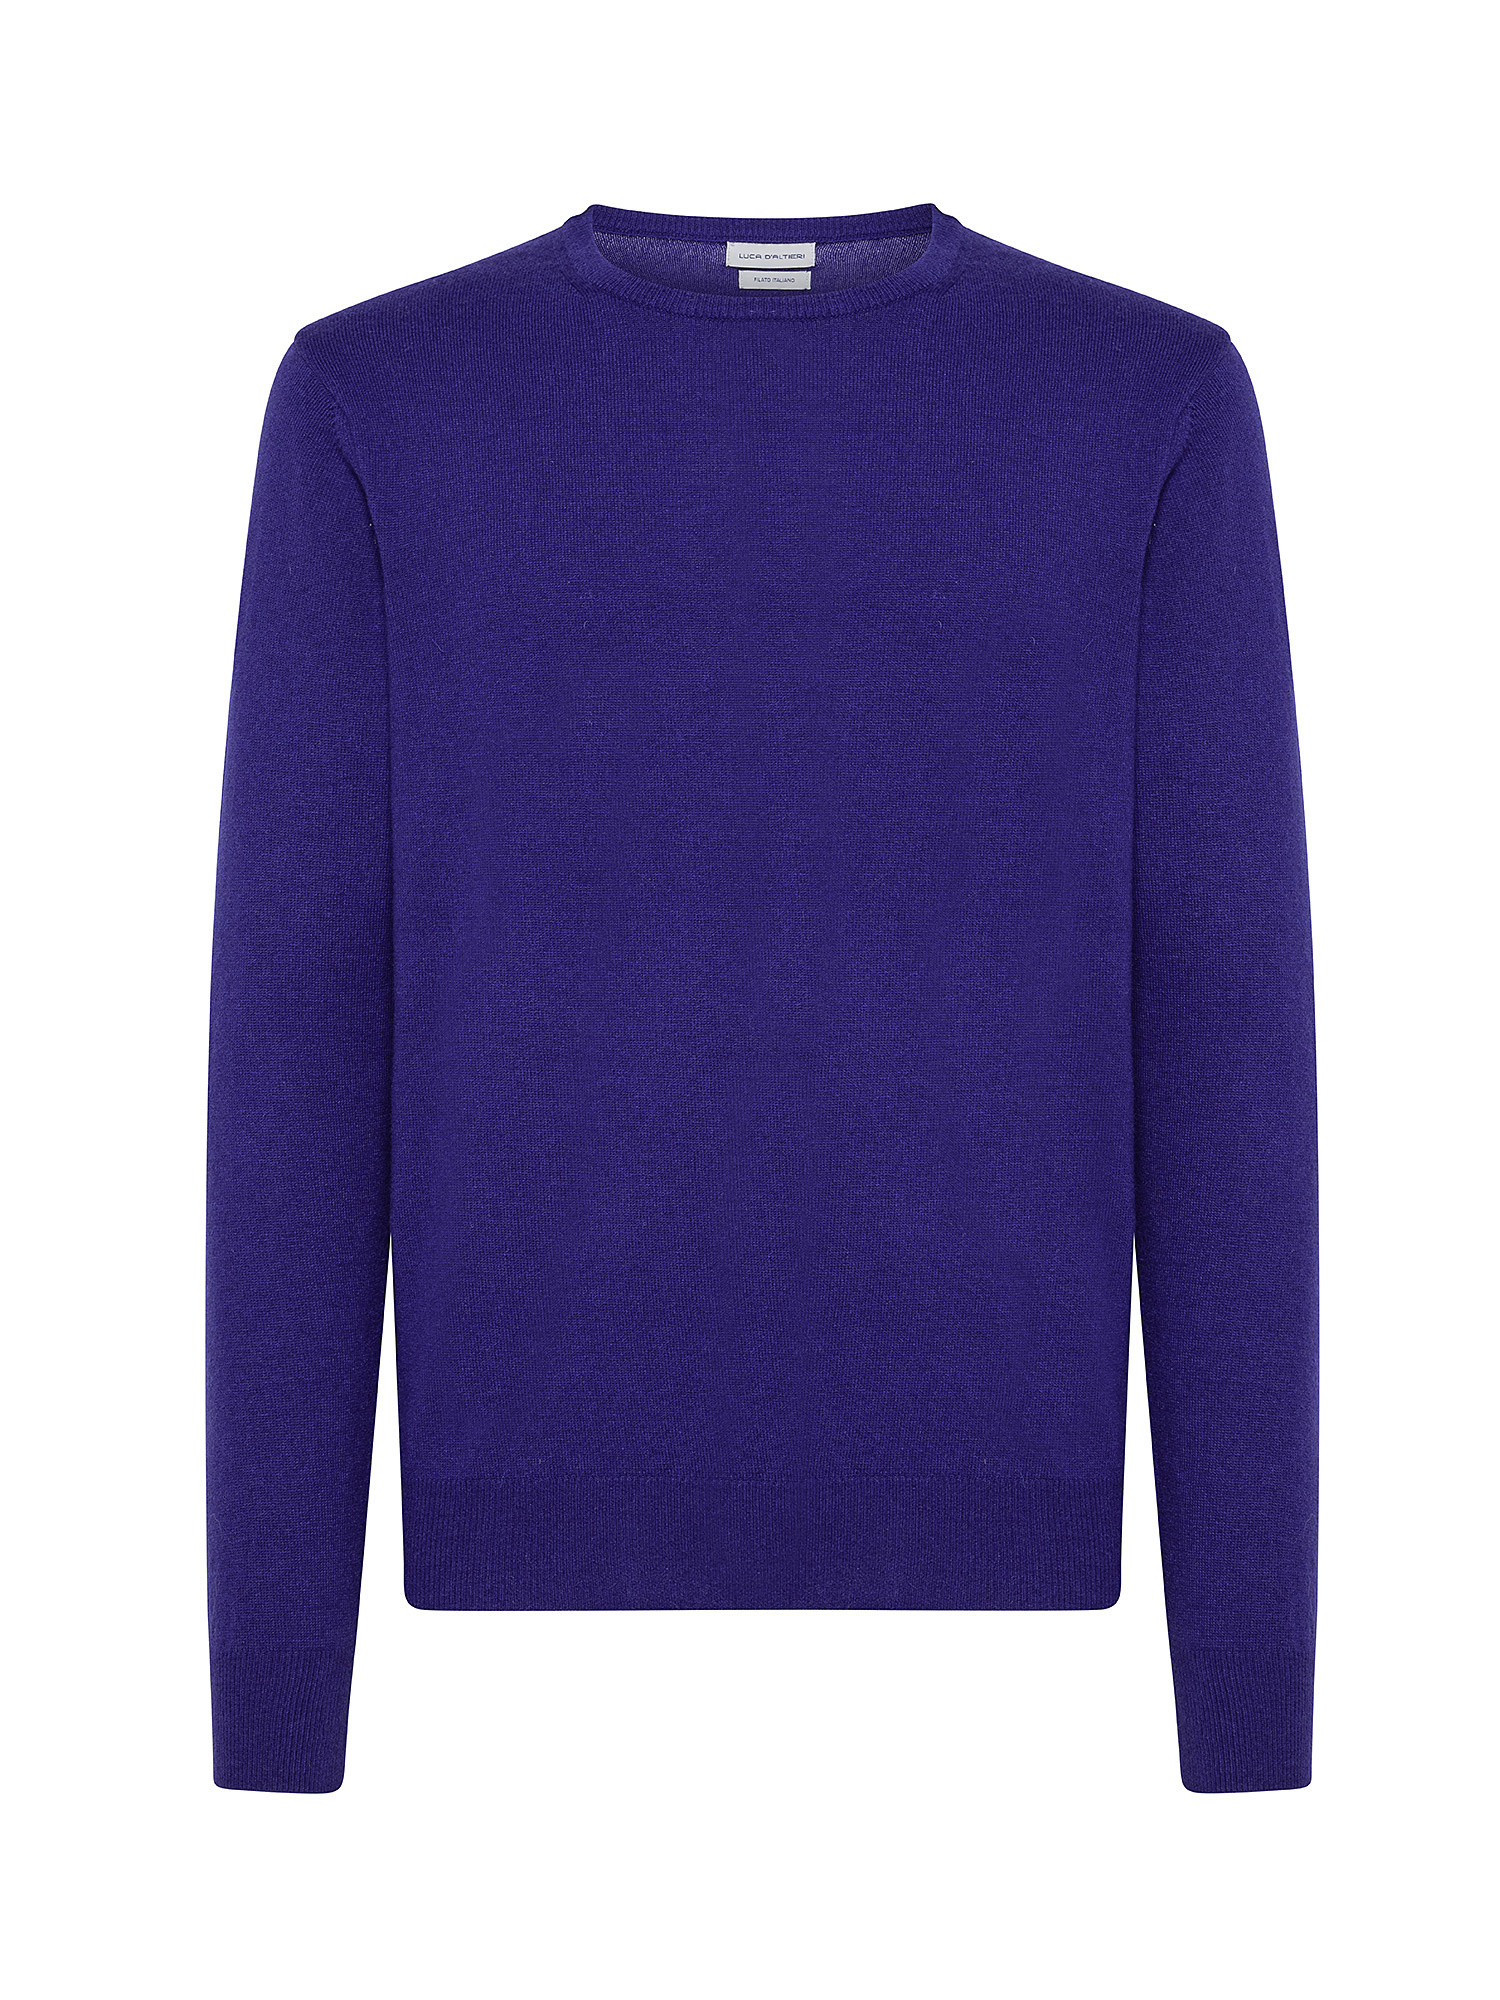 Cashmere Blend crewneck sweater with noble fibers, Royal Blue, large image number 0